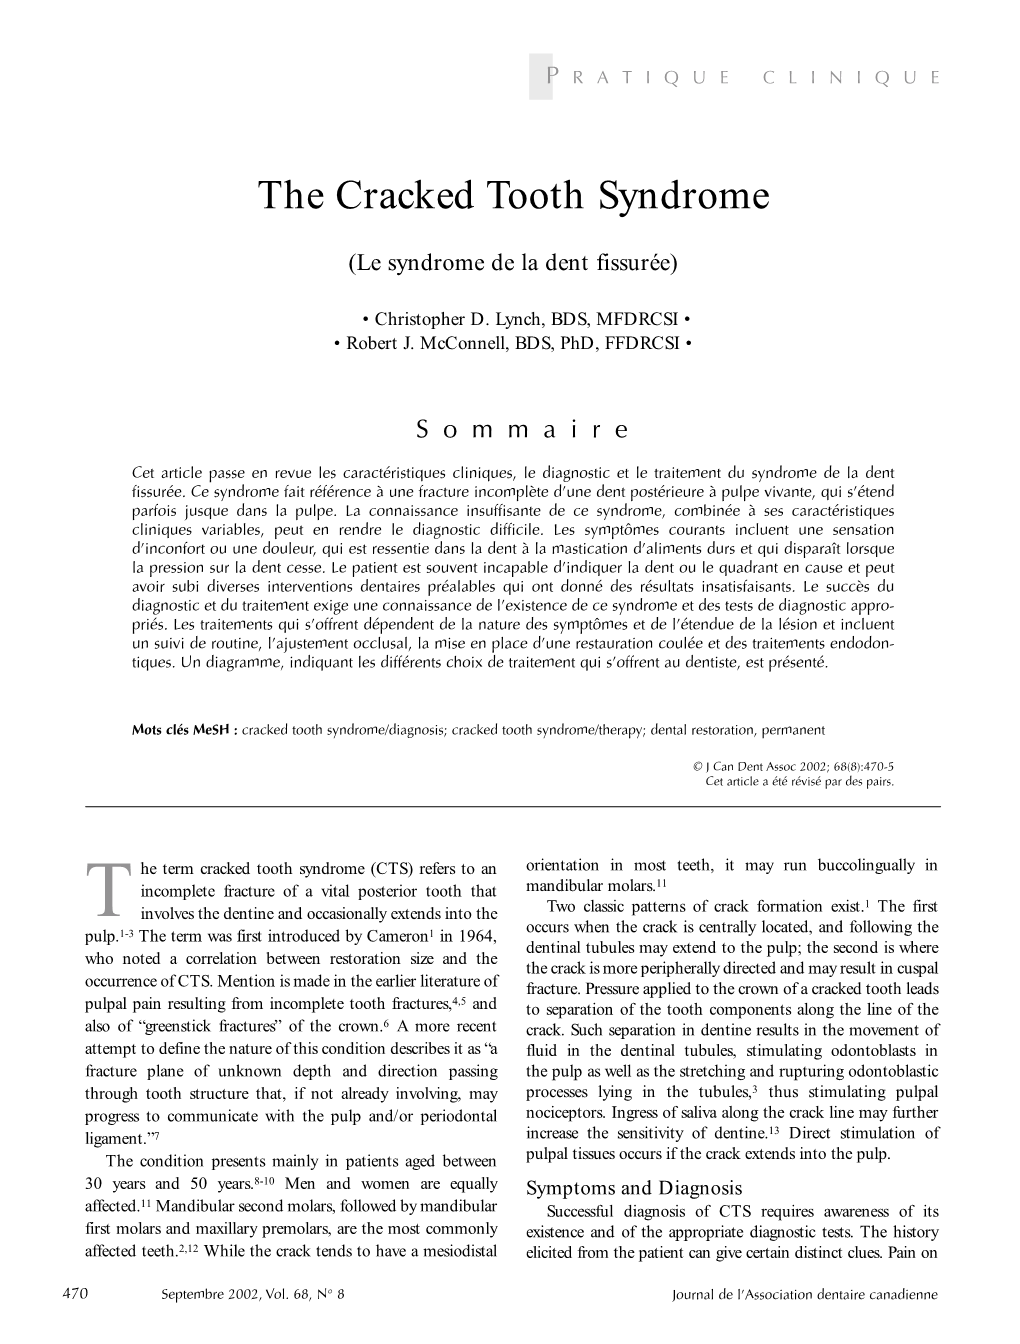 The Cracked Tooth Syndrome